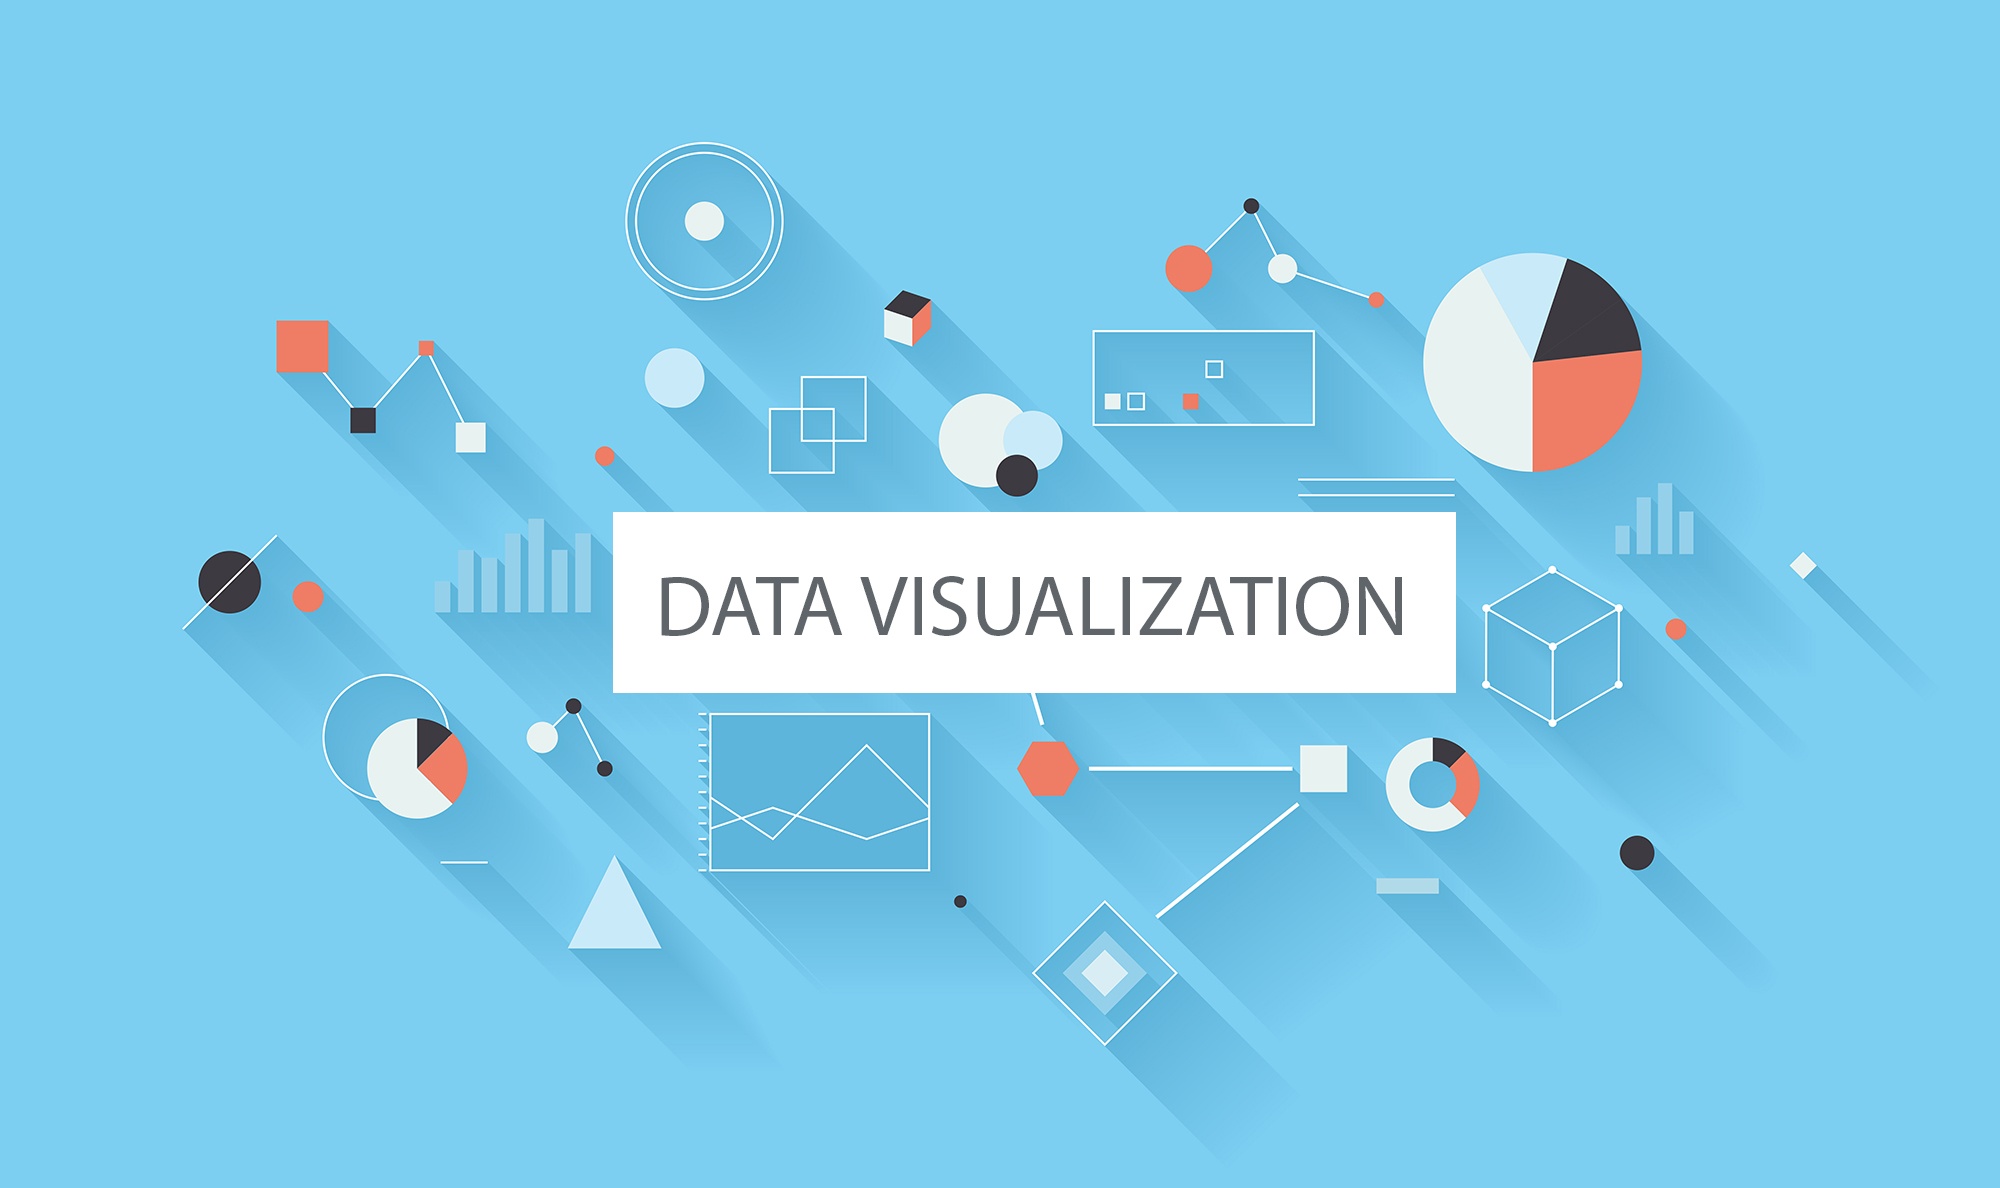 Visualize your data!